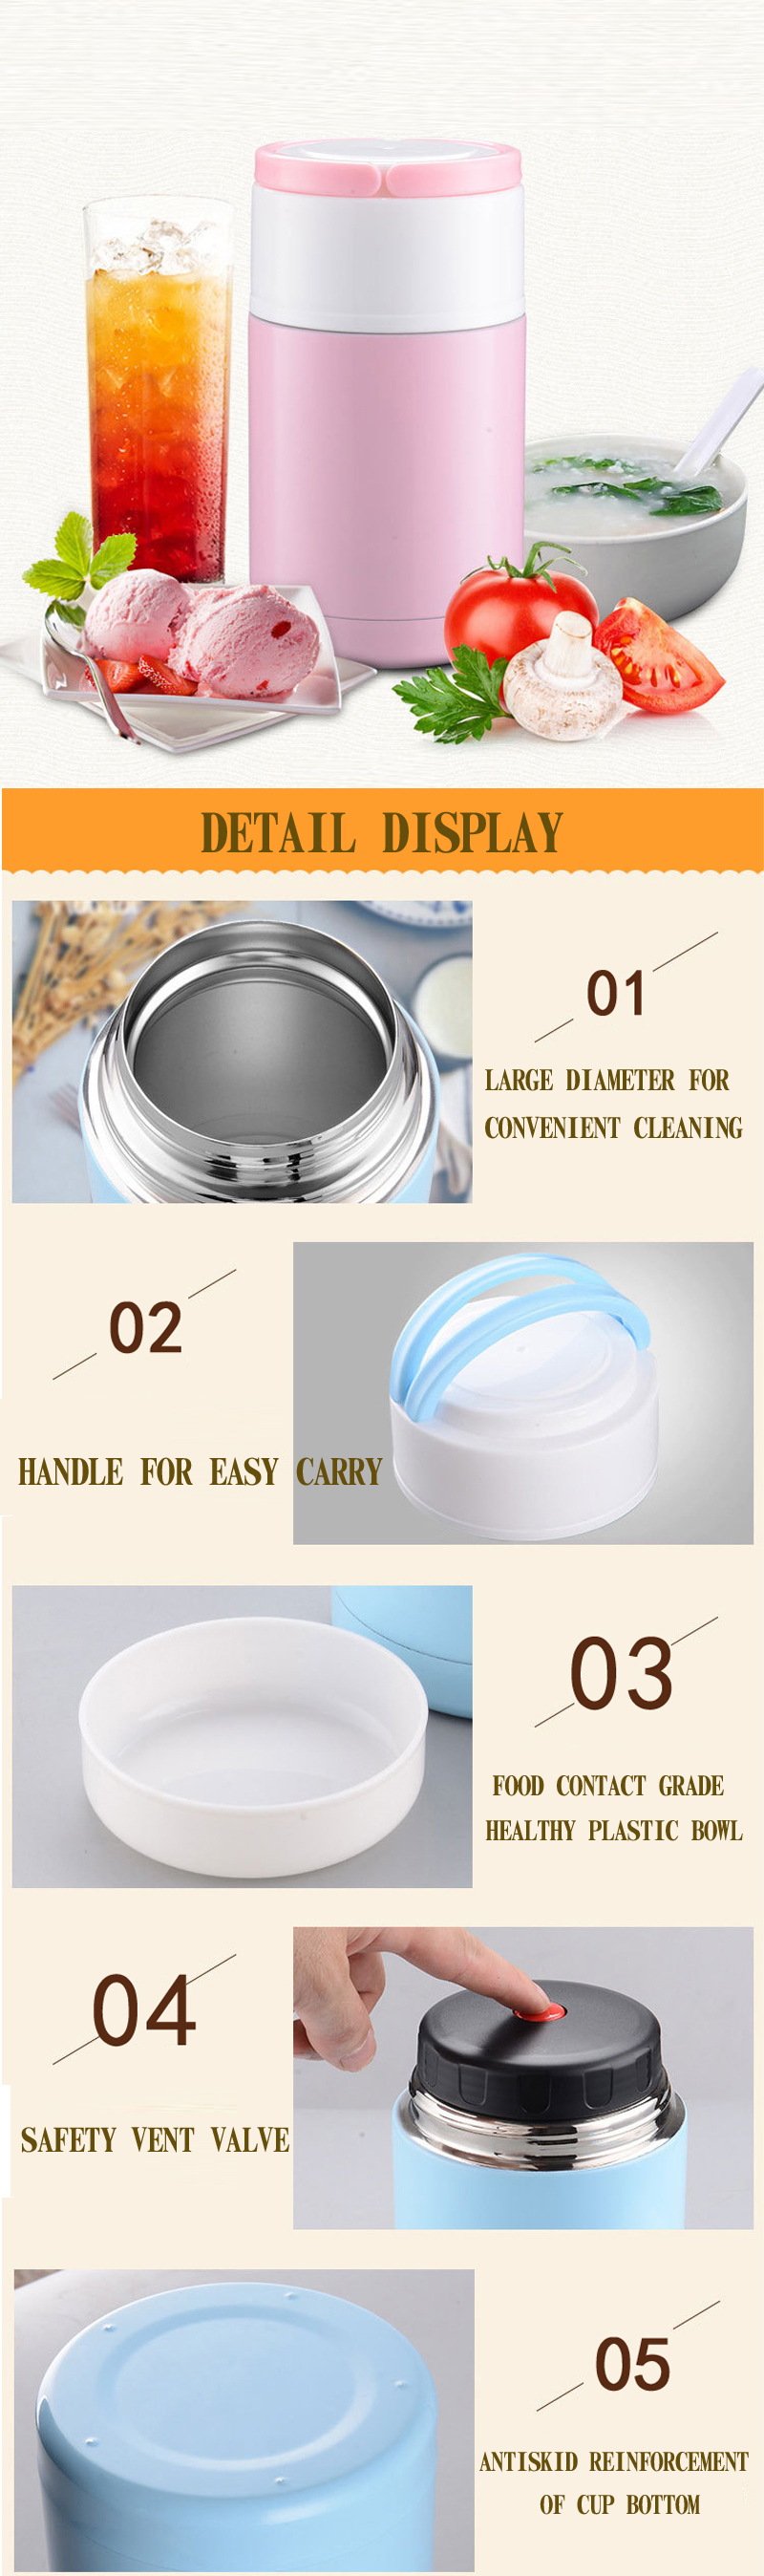 2018 New Fashion Vacuum Insulated Stainless Steel Food Pot 35 Oz Lunch Box